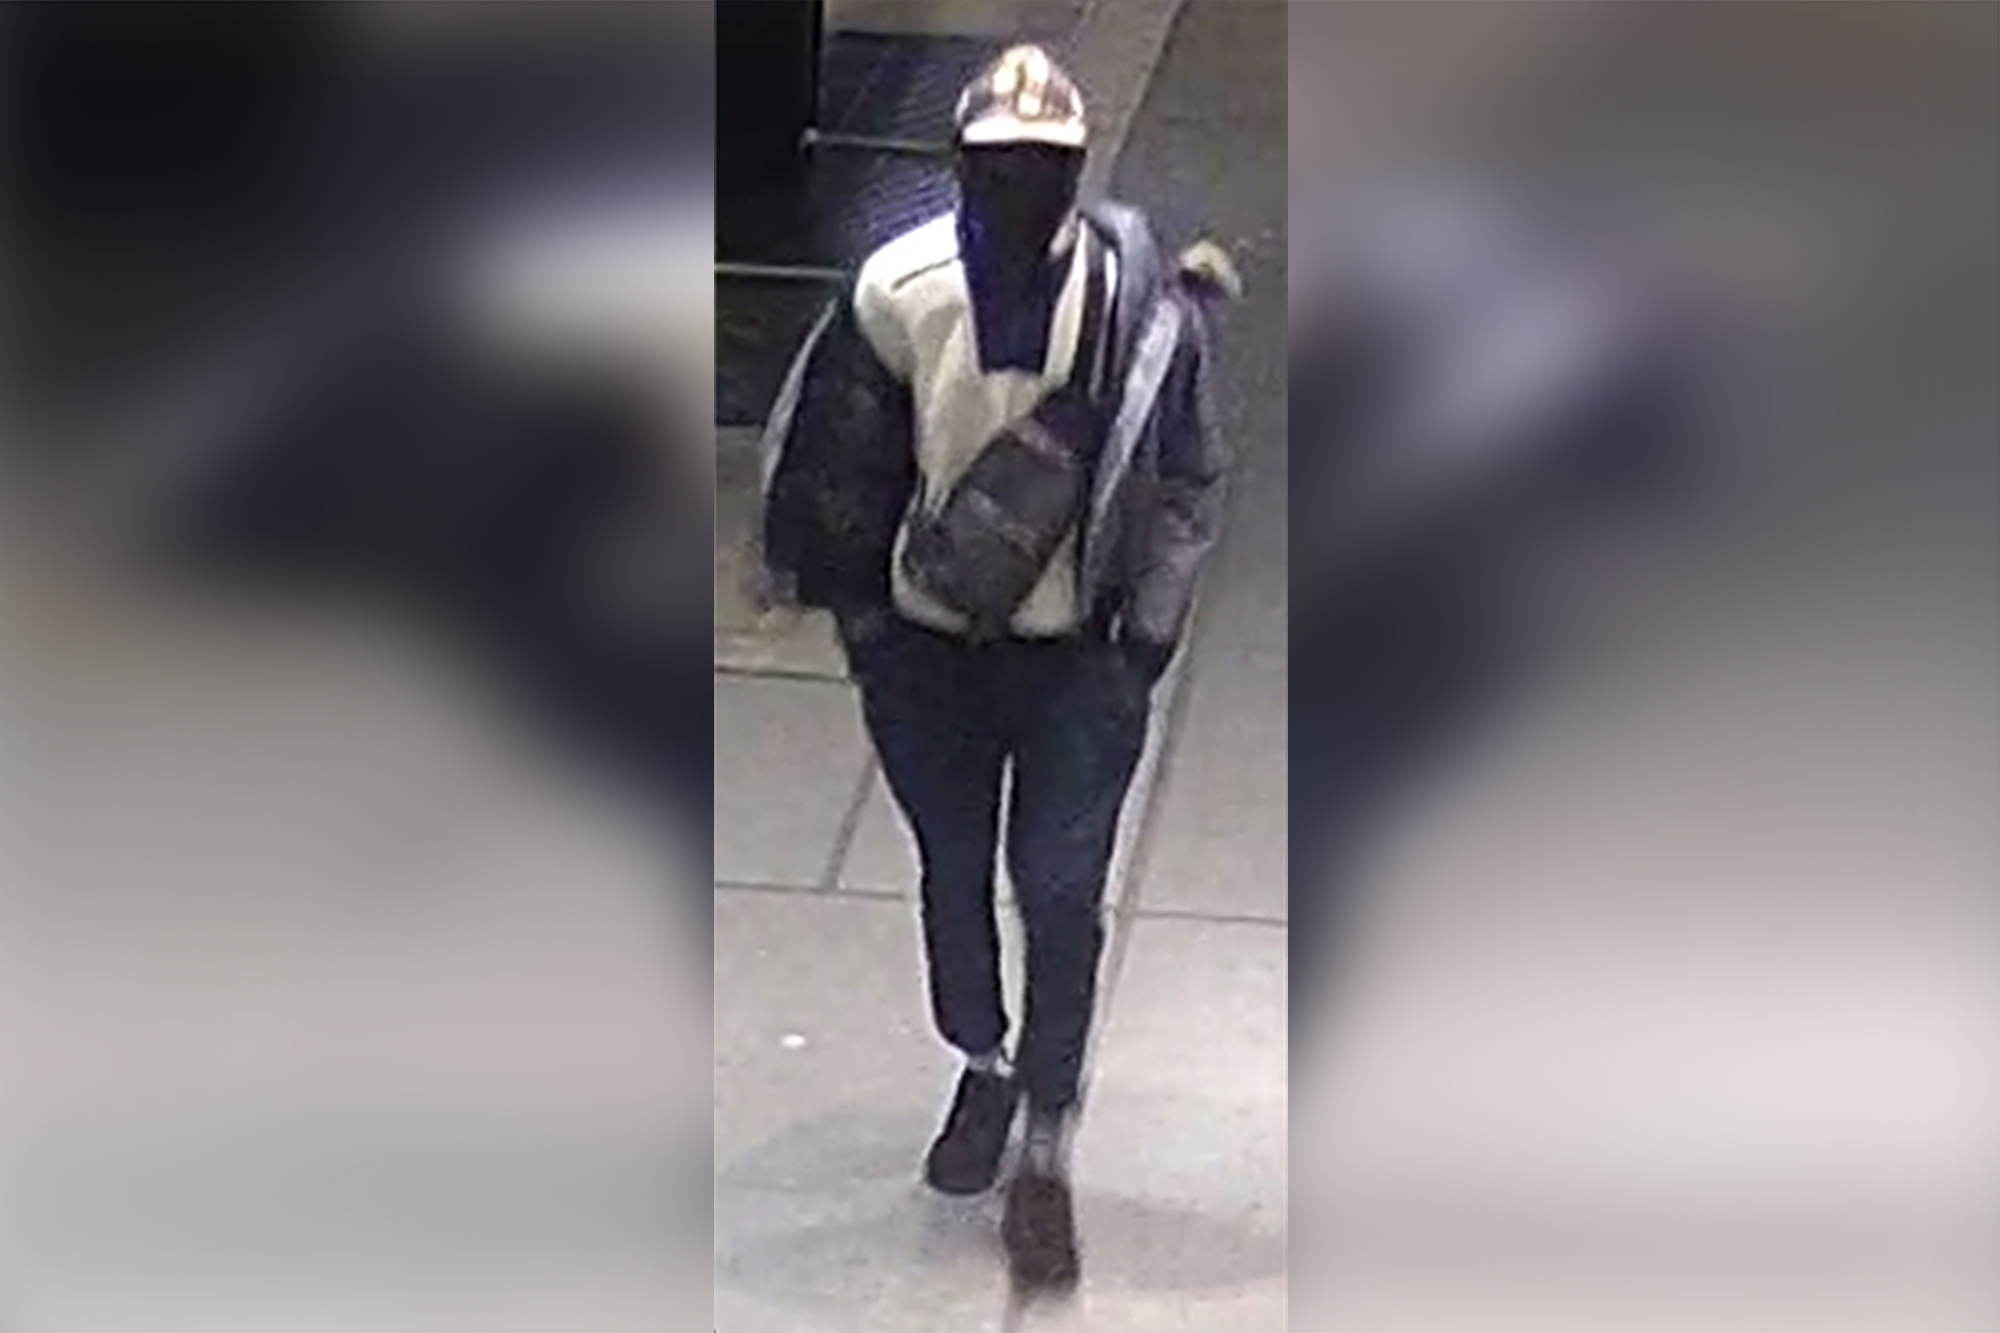 According to police, this man stabbed another person in the neck as a subway train was pulling into Penn Station on November 21, 2021.